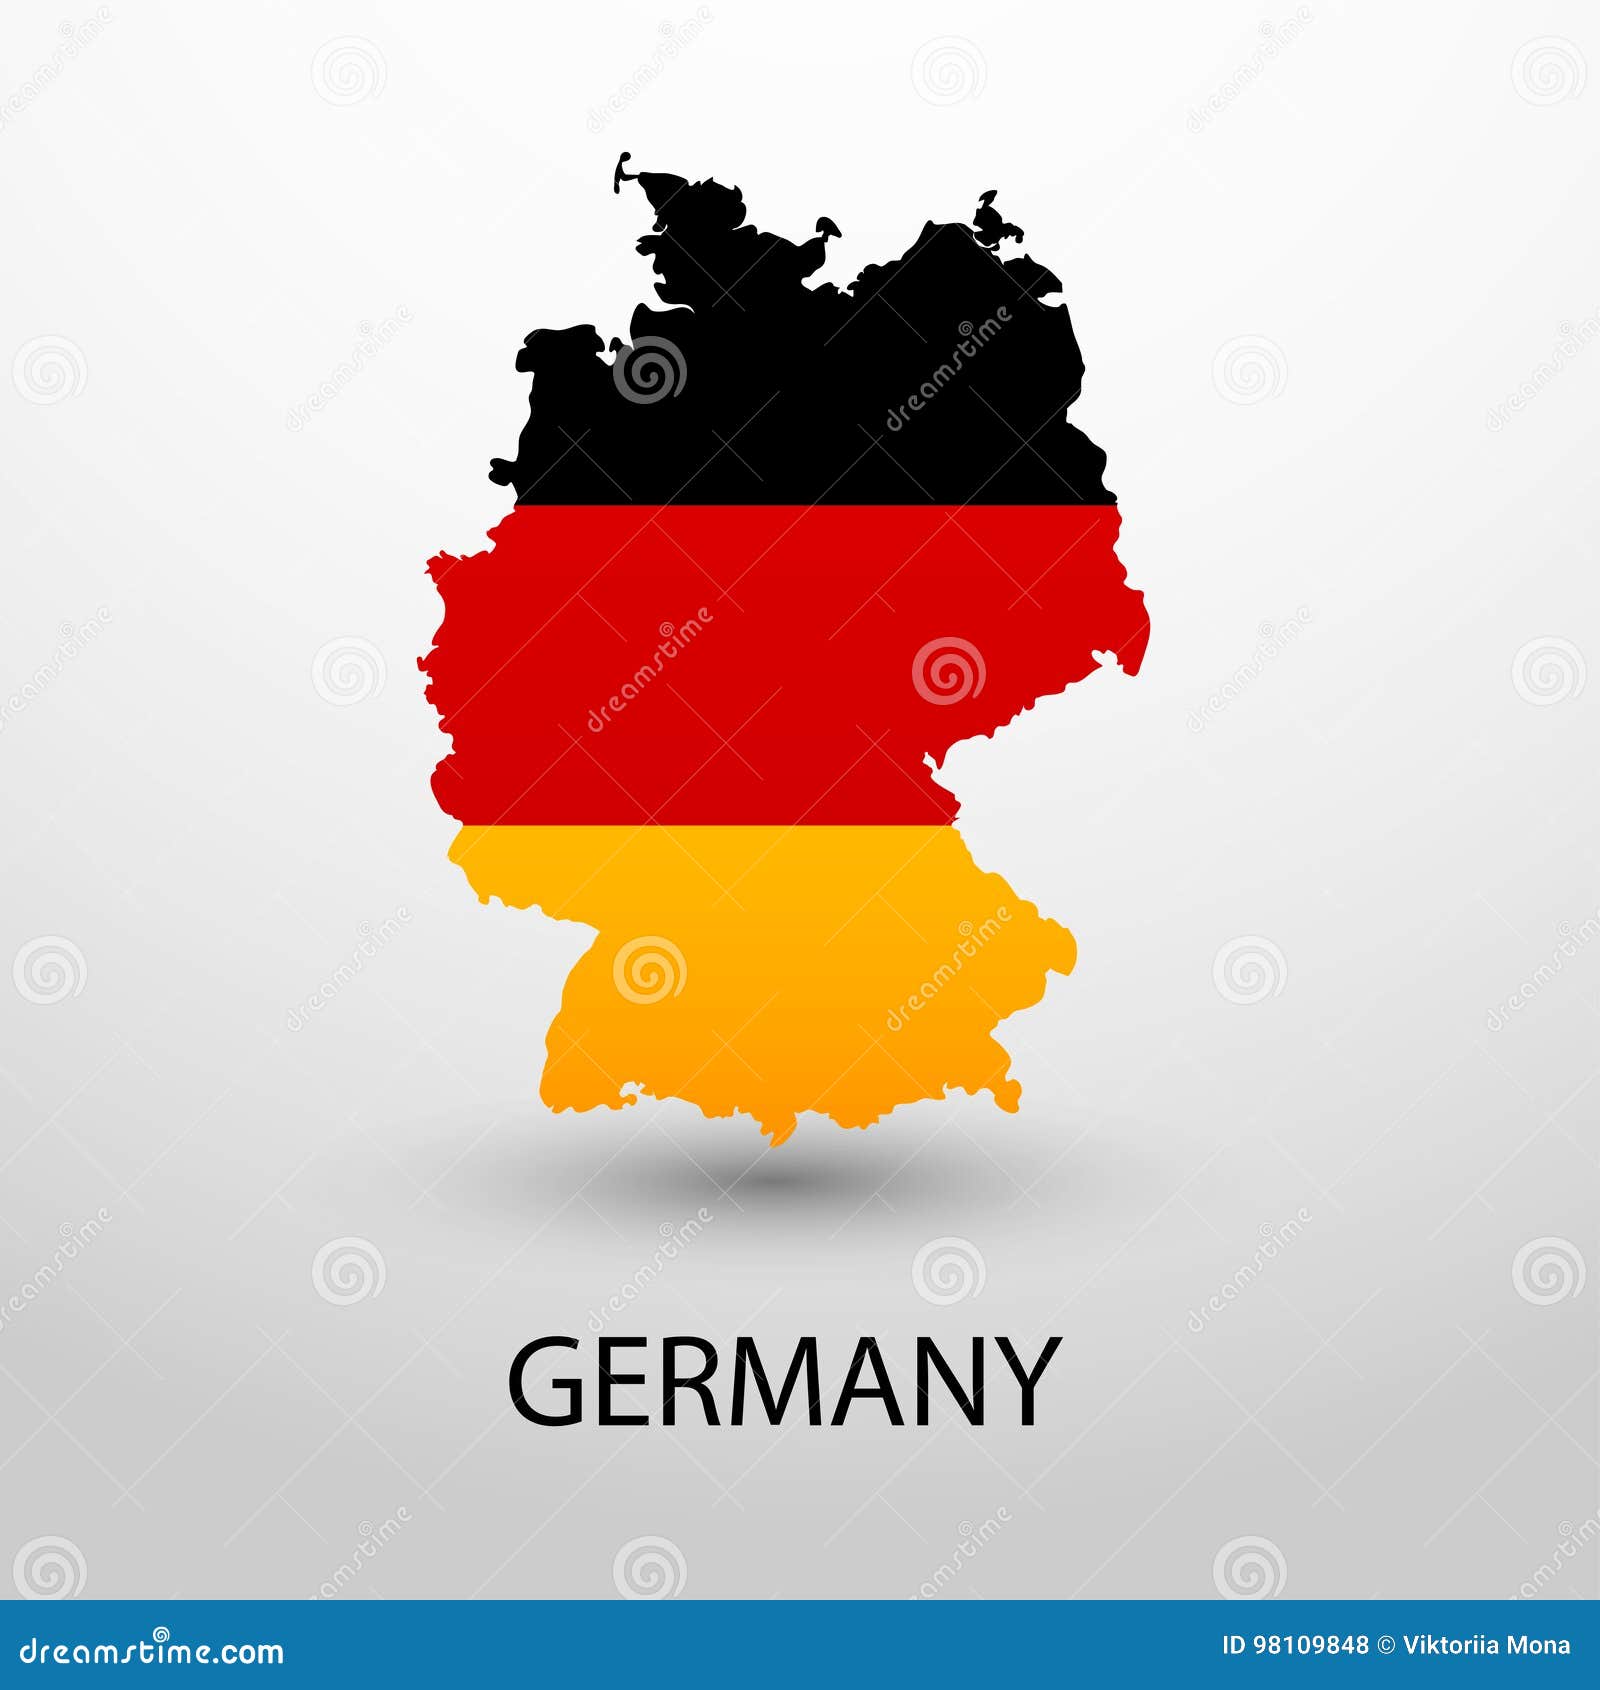 Map and flag of Germany stock vector. Illustration of detail - 98109848